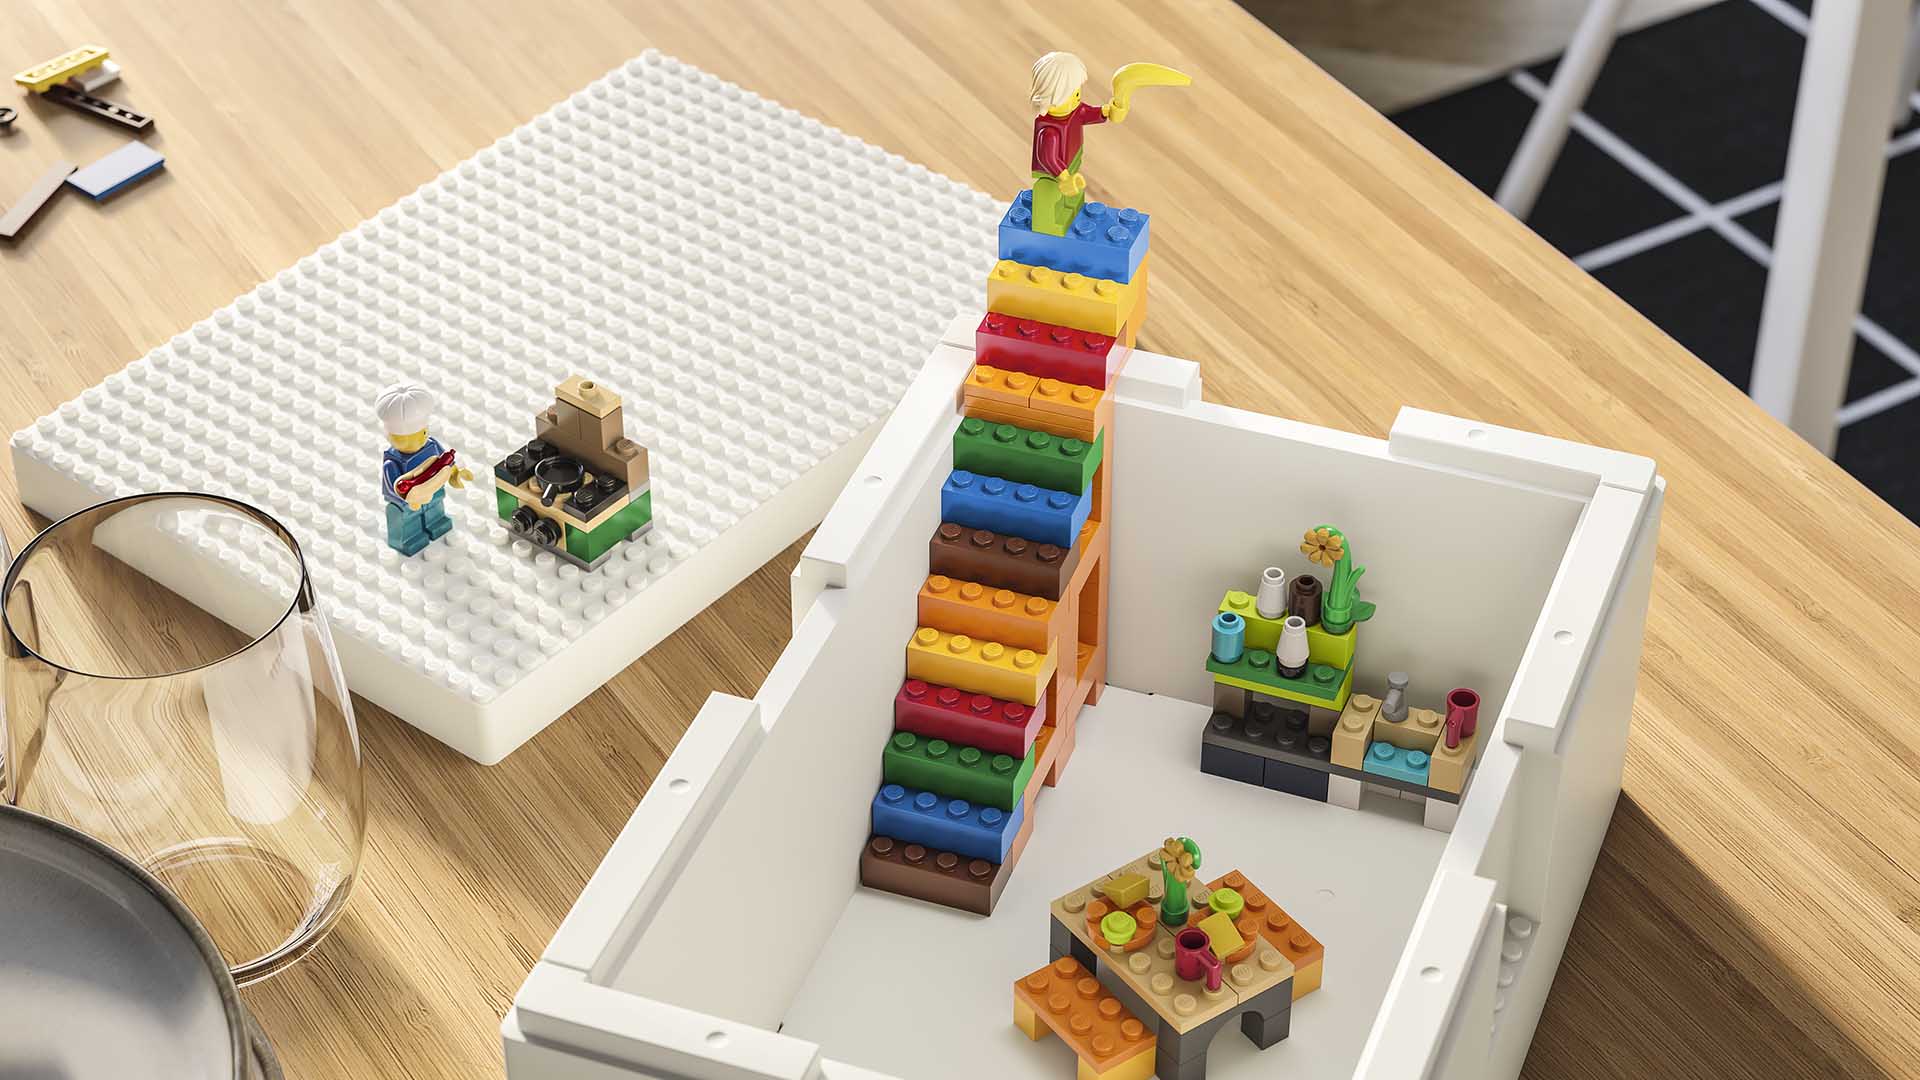 IKEA and Lego Are Releasing a Collection of Storage Boxes That You Can Play With